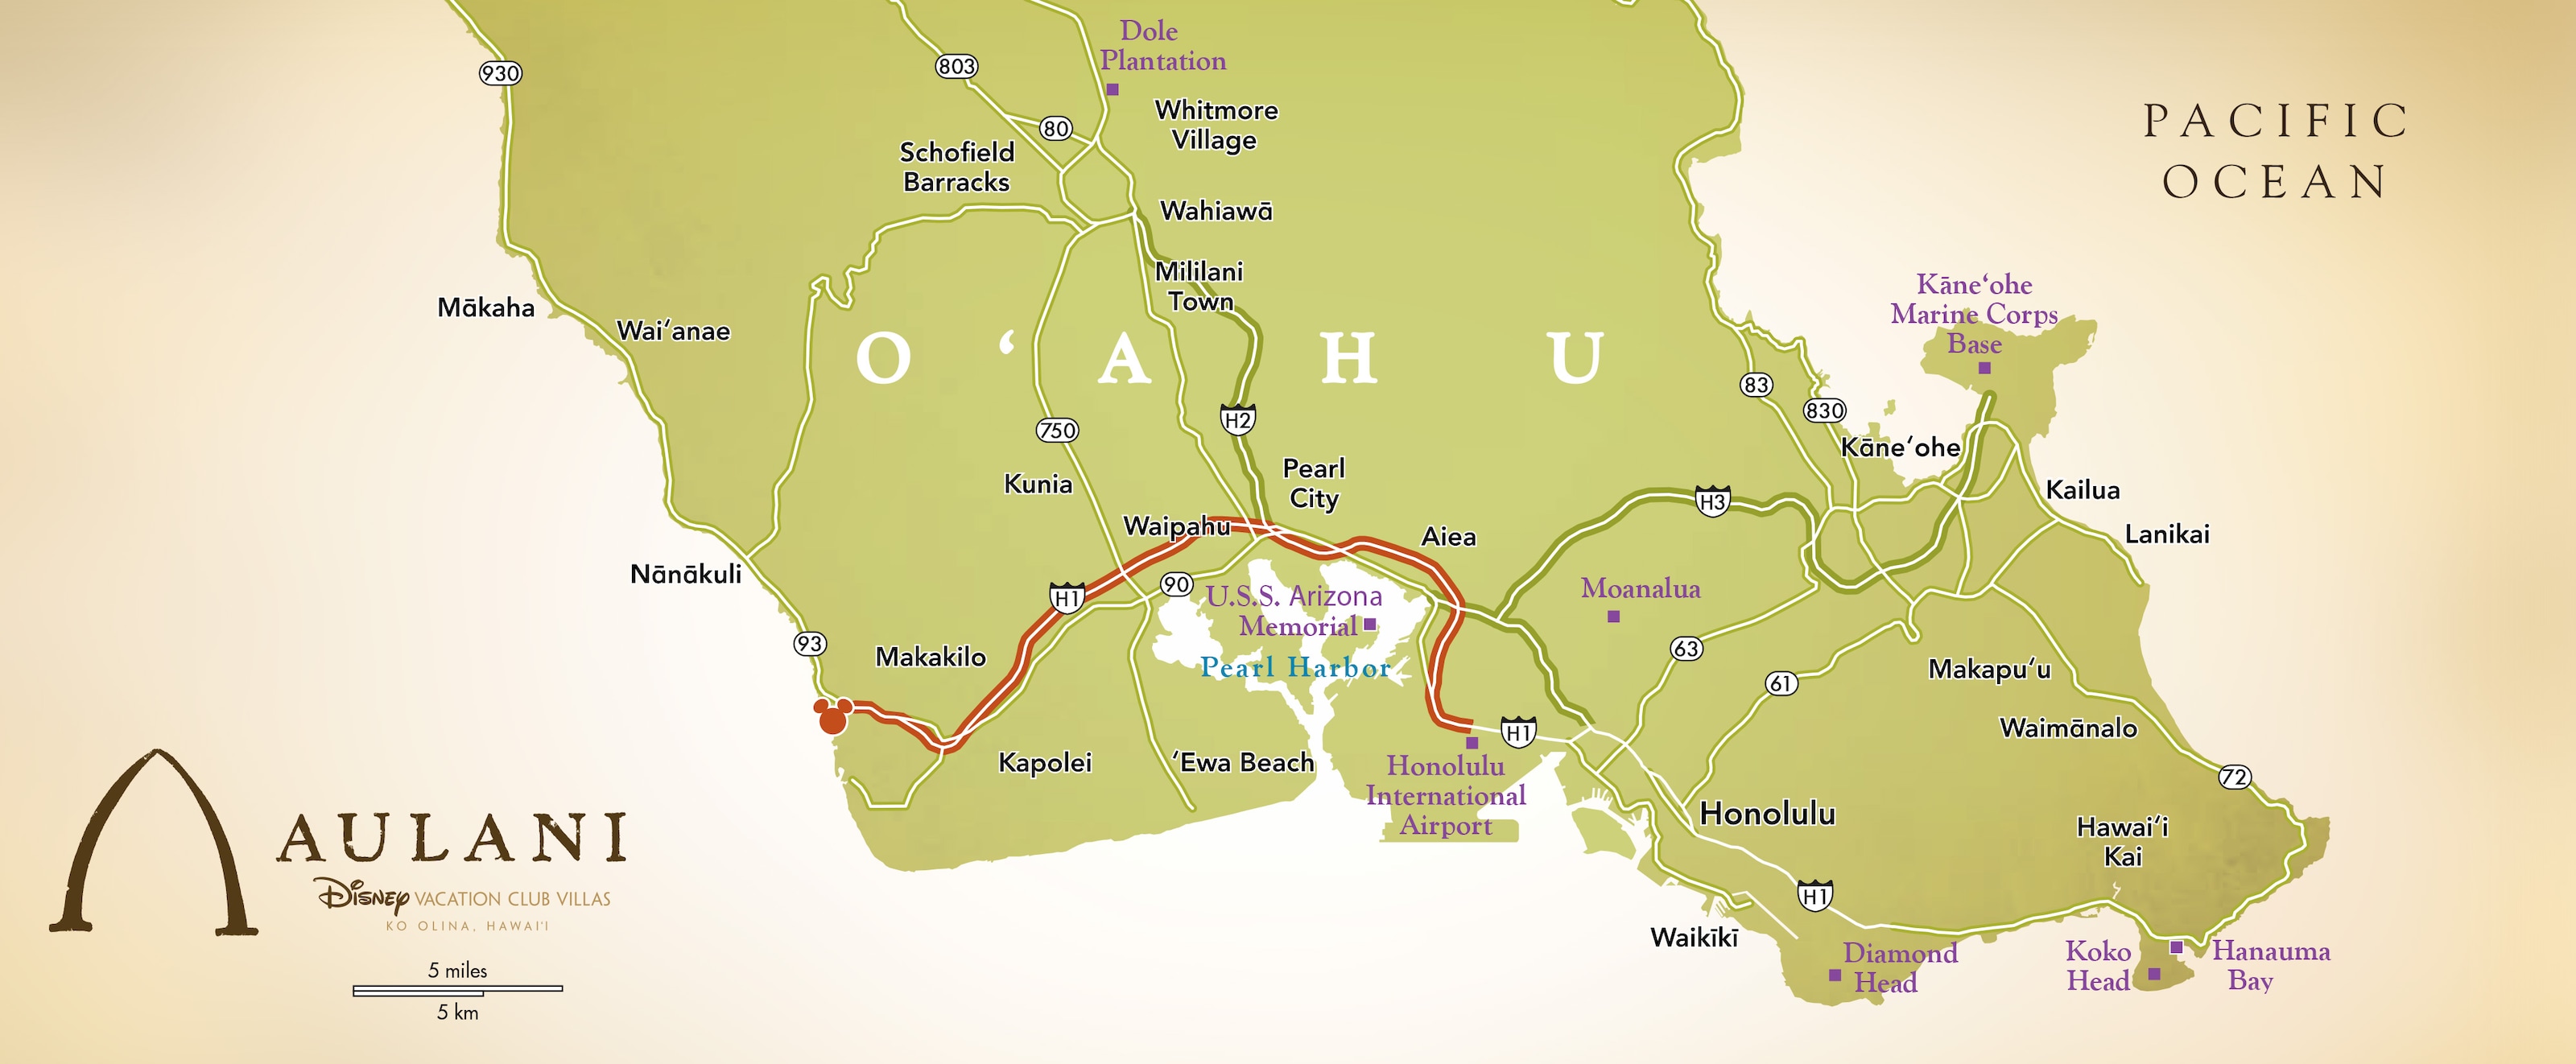 A map showing the route from Honolulu to Aulani Resort & Spa on the Southwestern shore of O'ahu